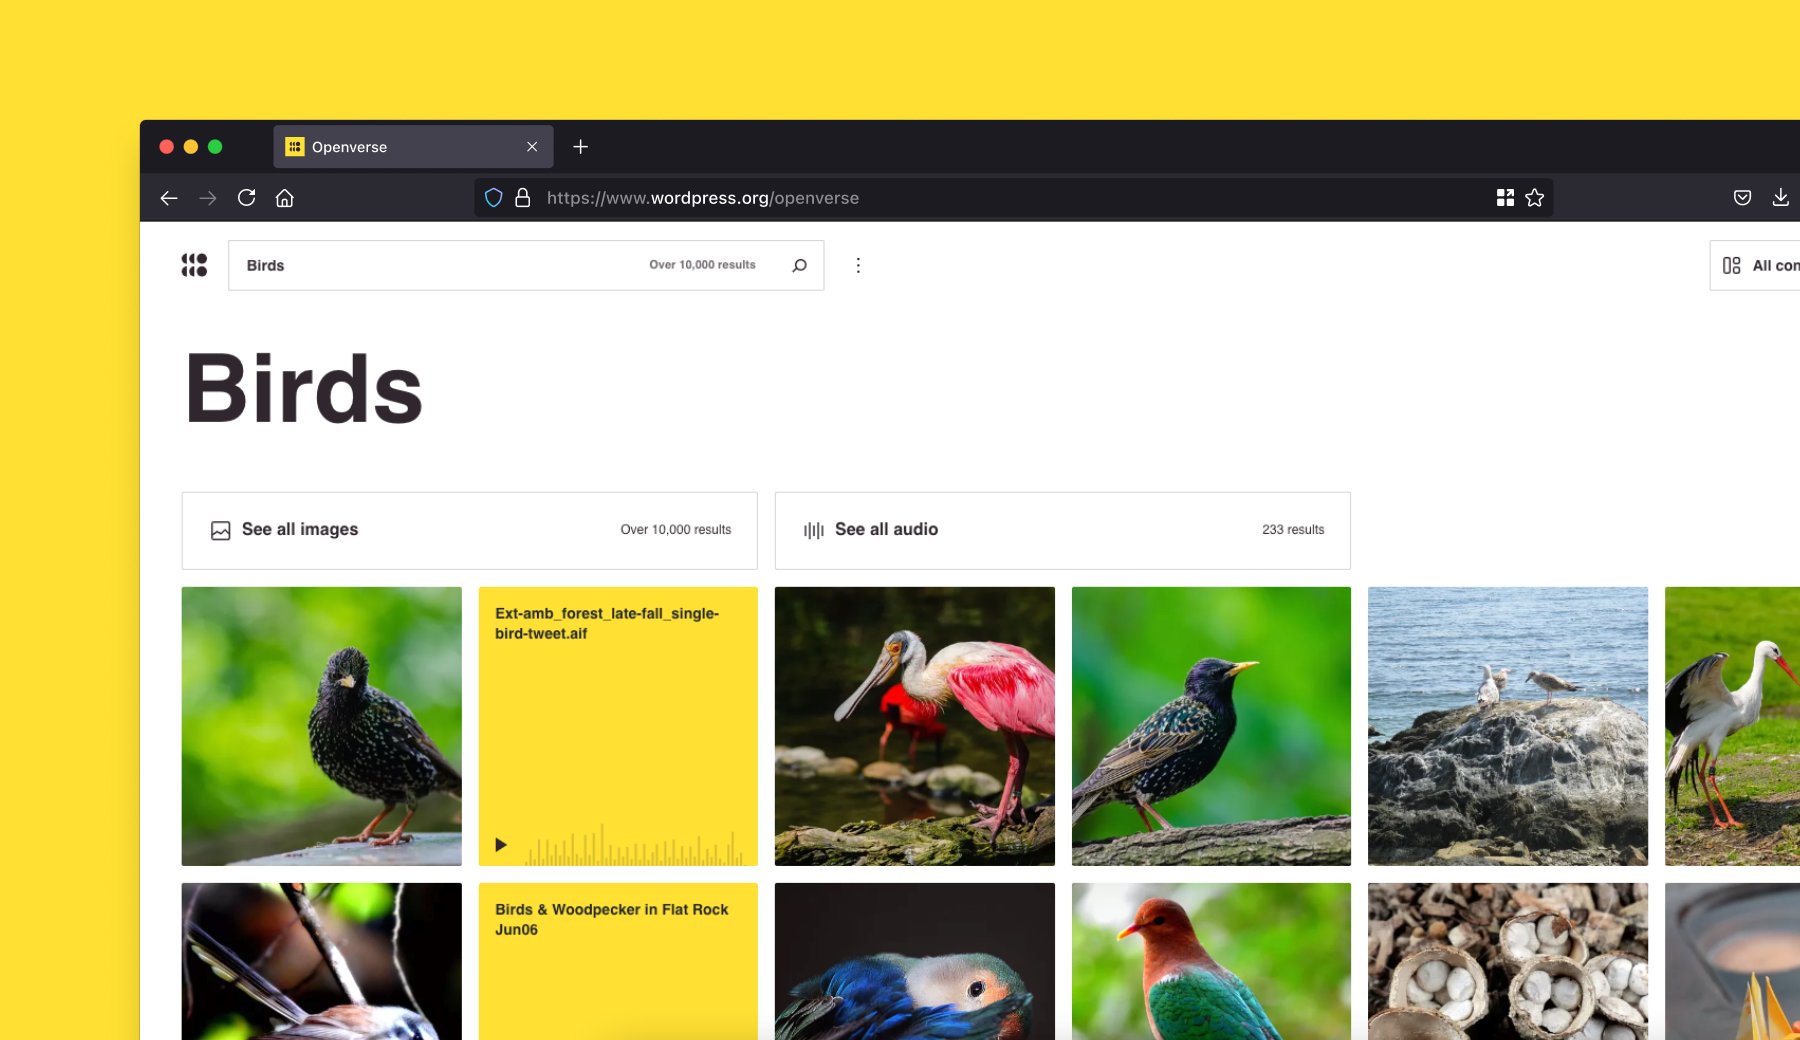 Screenshot of the search results for "Birds" on Openverse.